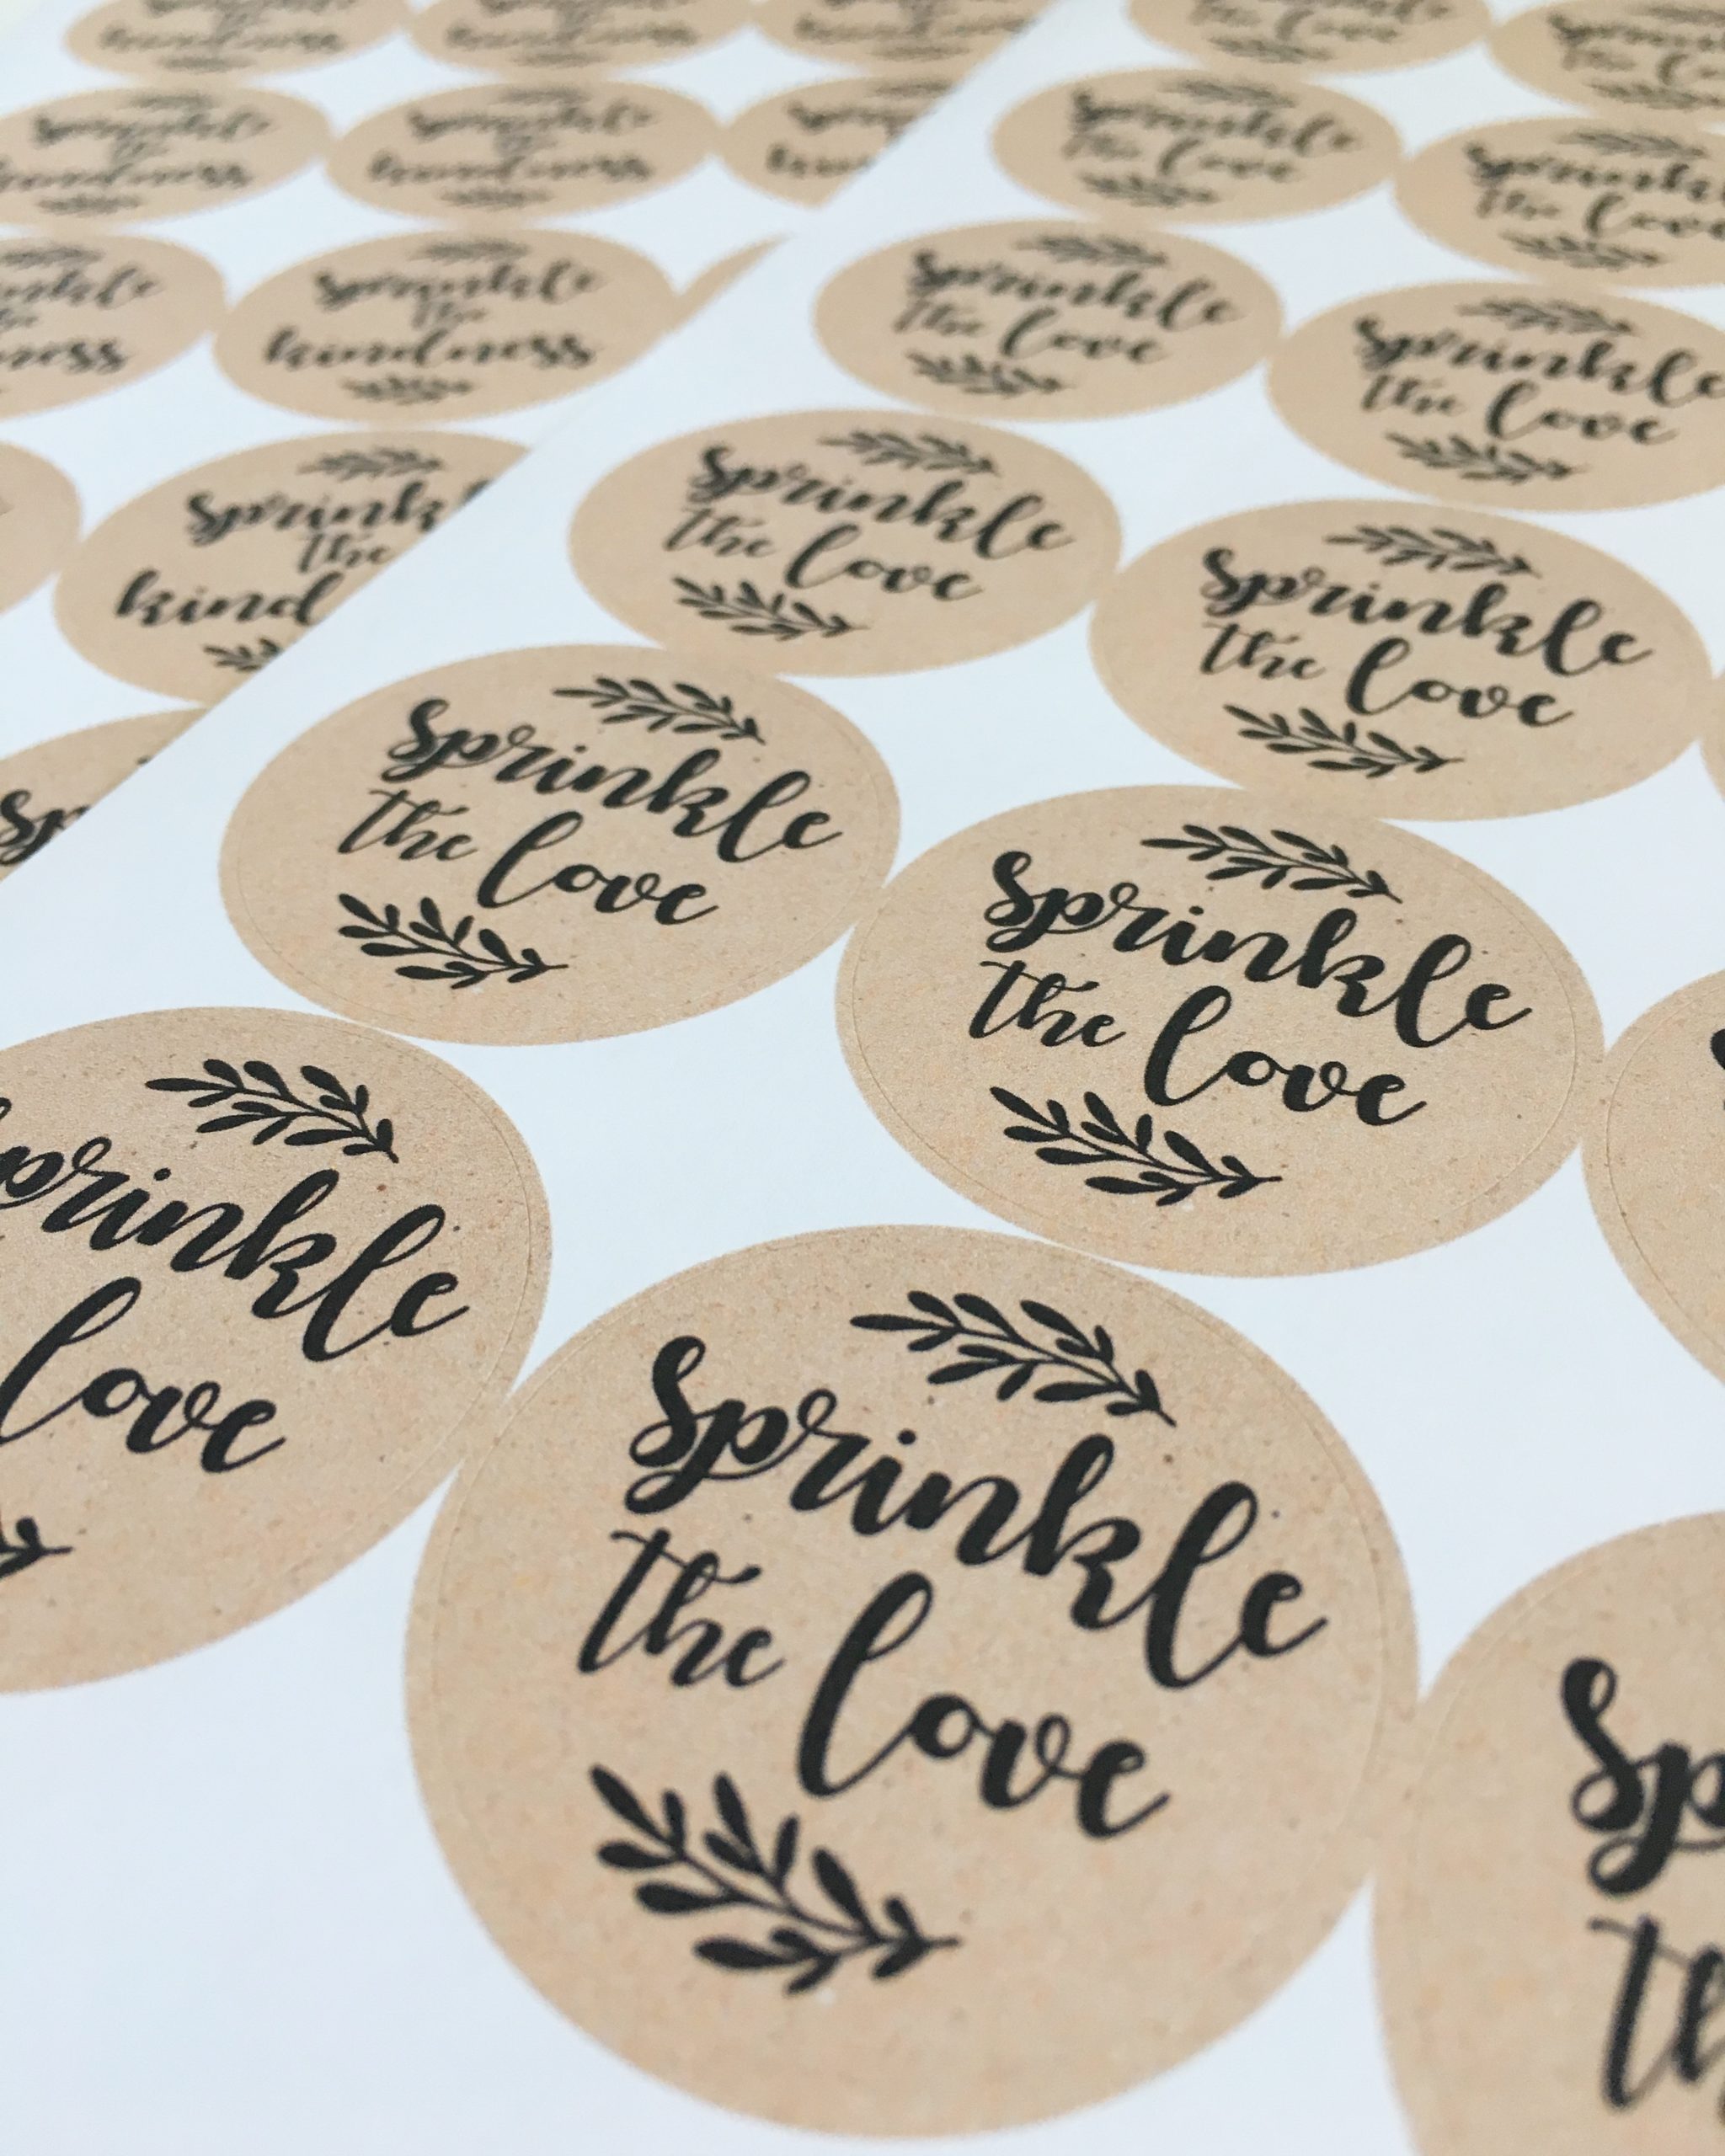 Sprinkle The Love and Throw Me Wedding Stickers, 37mm Kraft